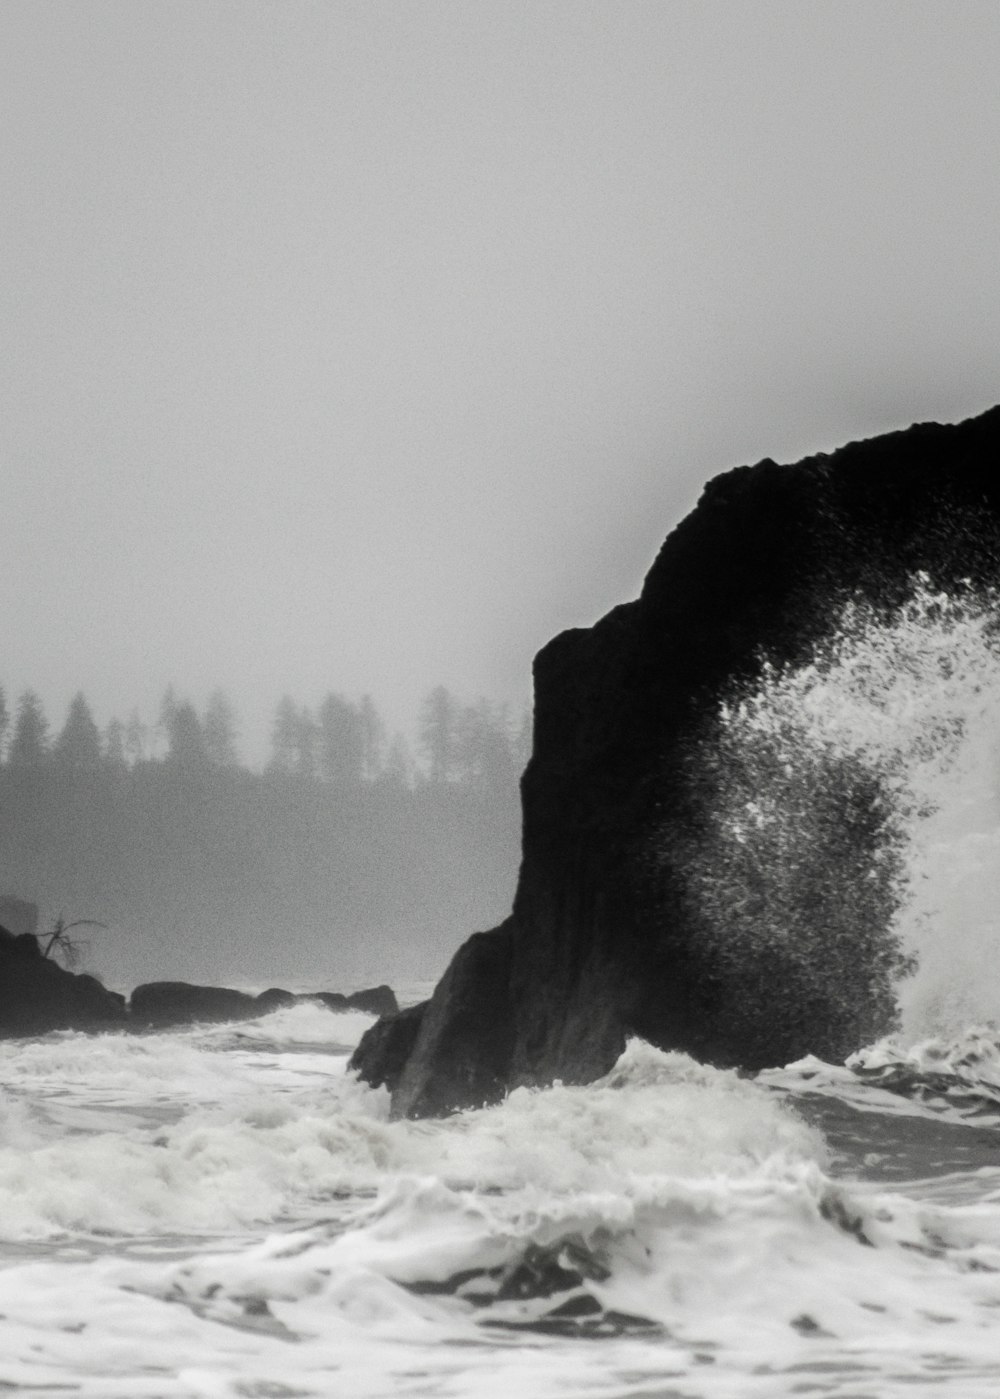 ocean waves crashing on shore during foggy weather